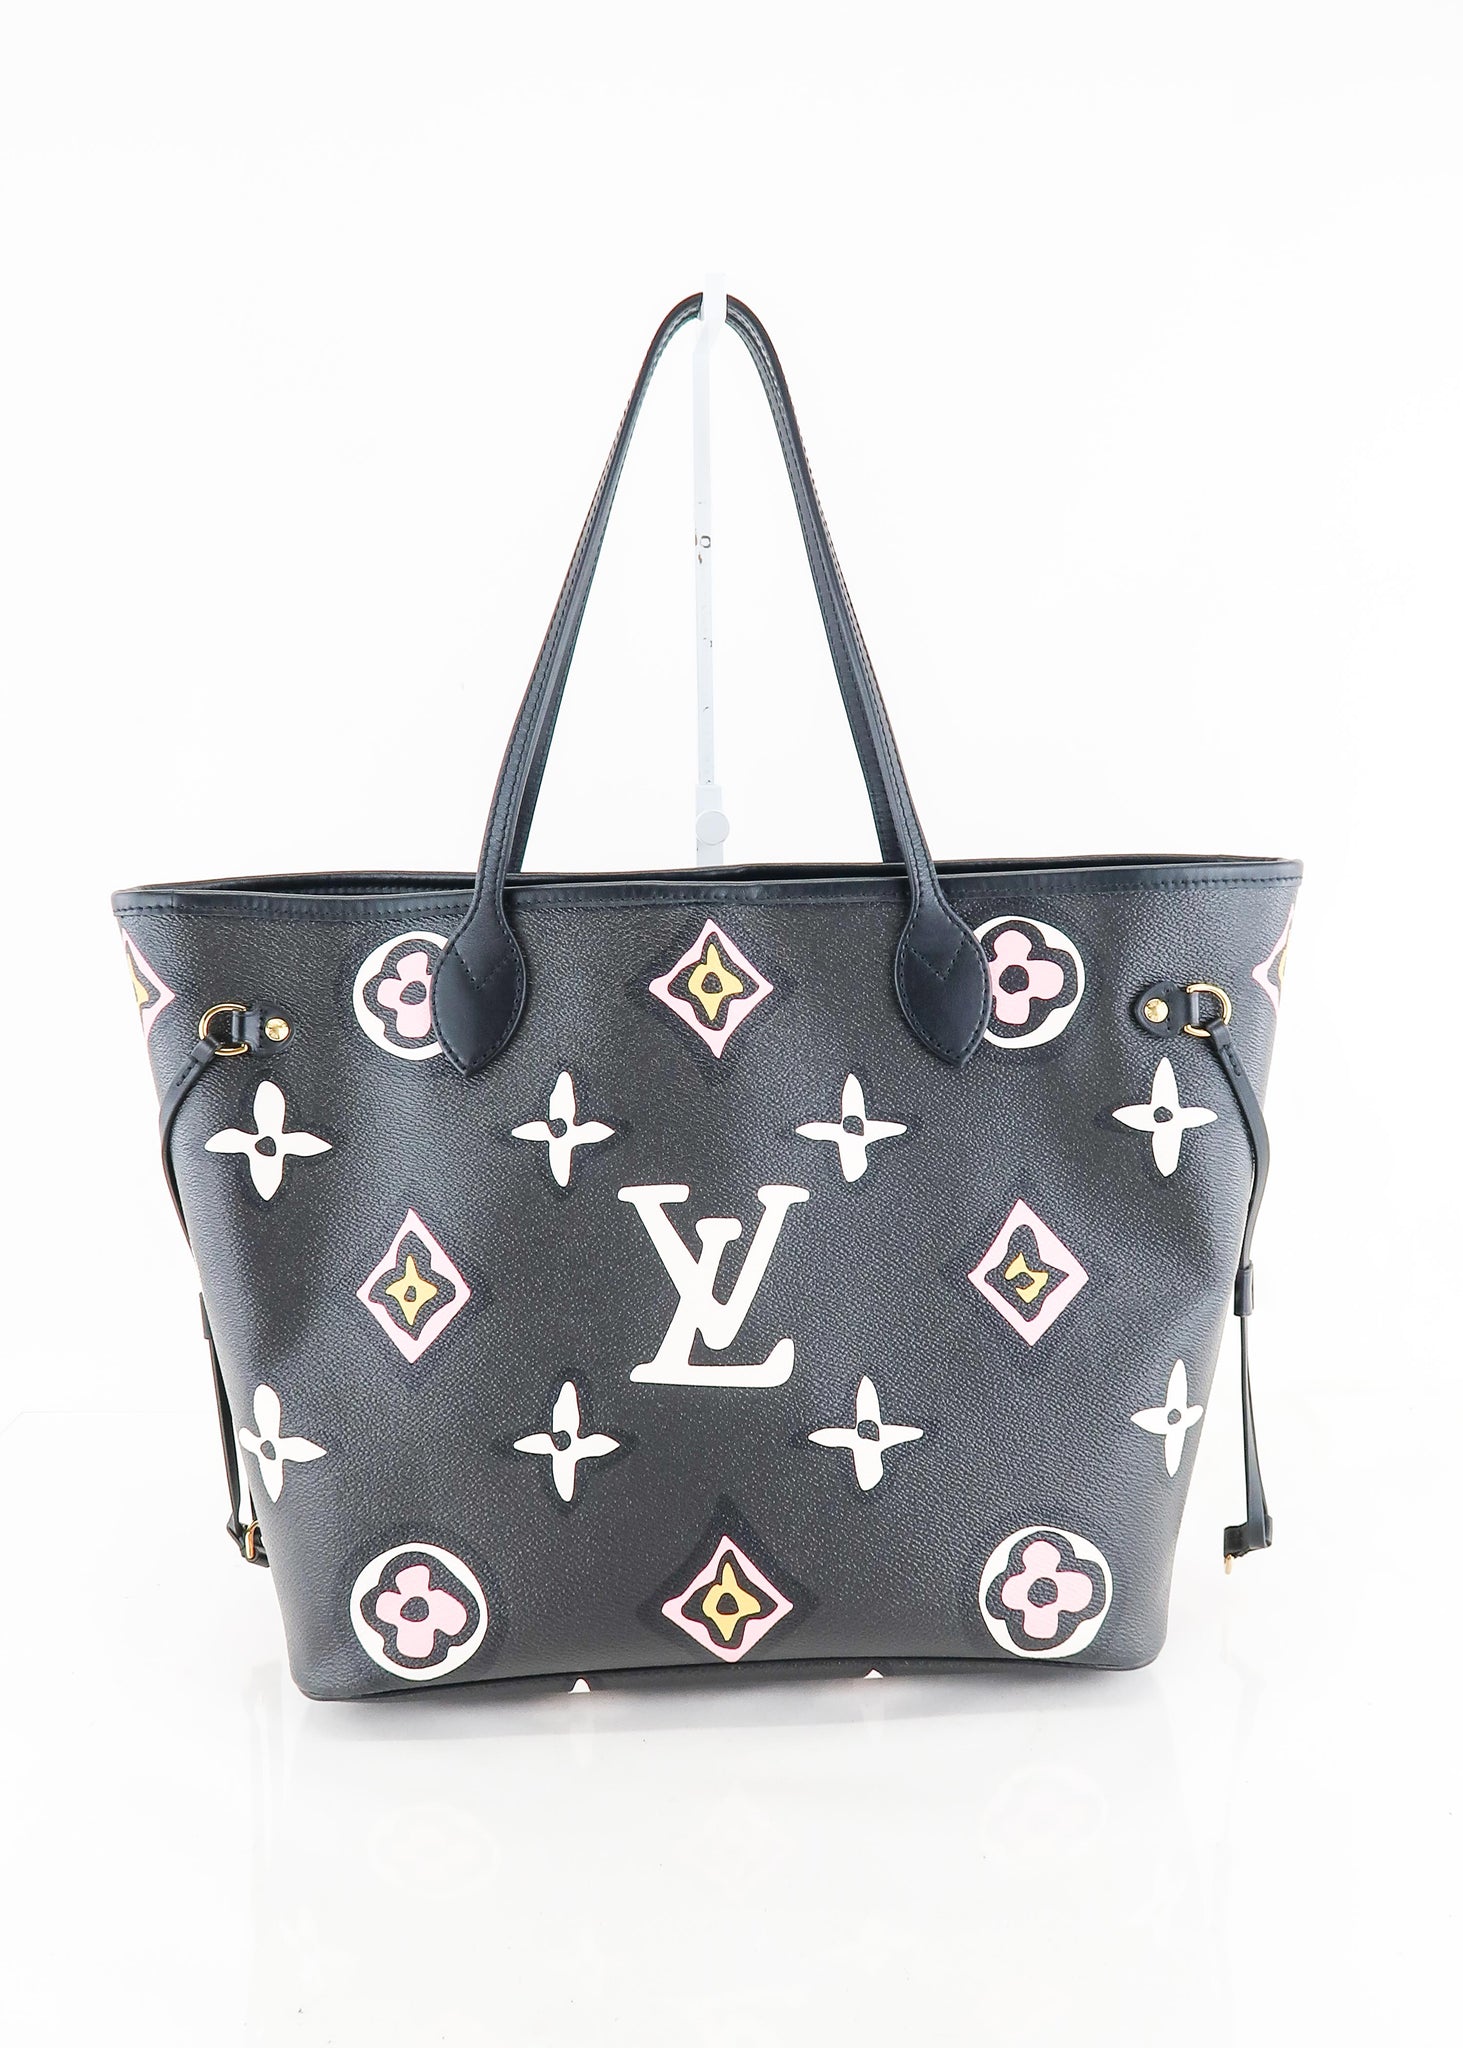 Louis Vuitton Neverfull NM Tote Wild at Heart Monogram Giant MM